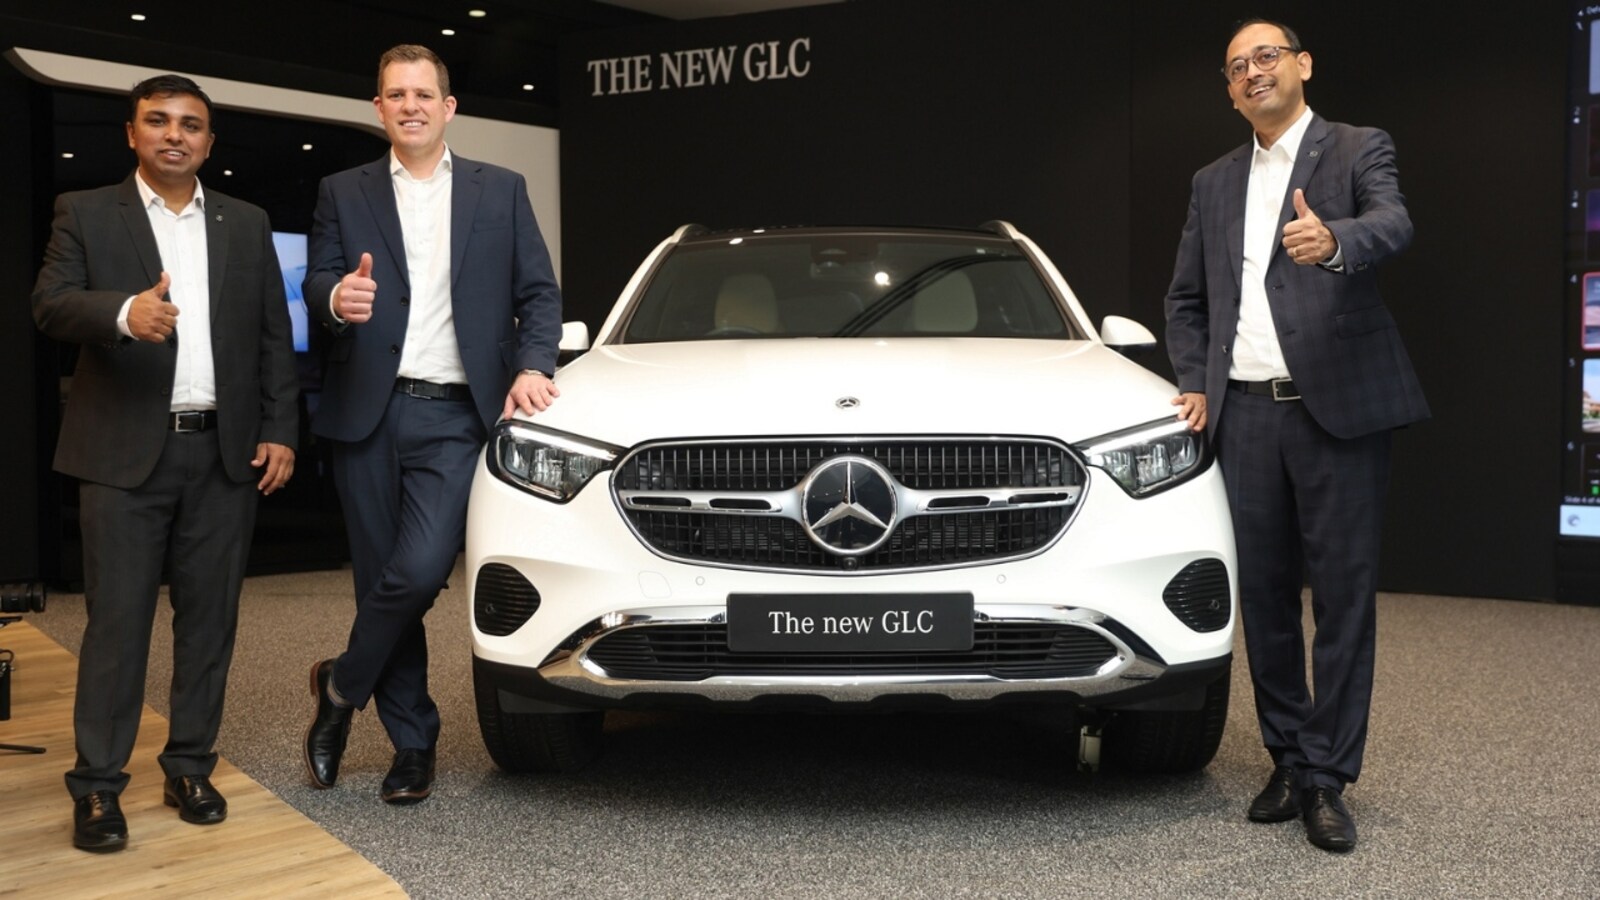 Mercedes Benz India rolls out 2nd gen GLC SUV priced at Rs 73.5 lakh